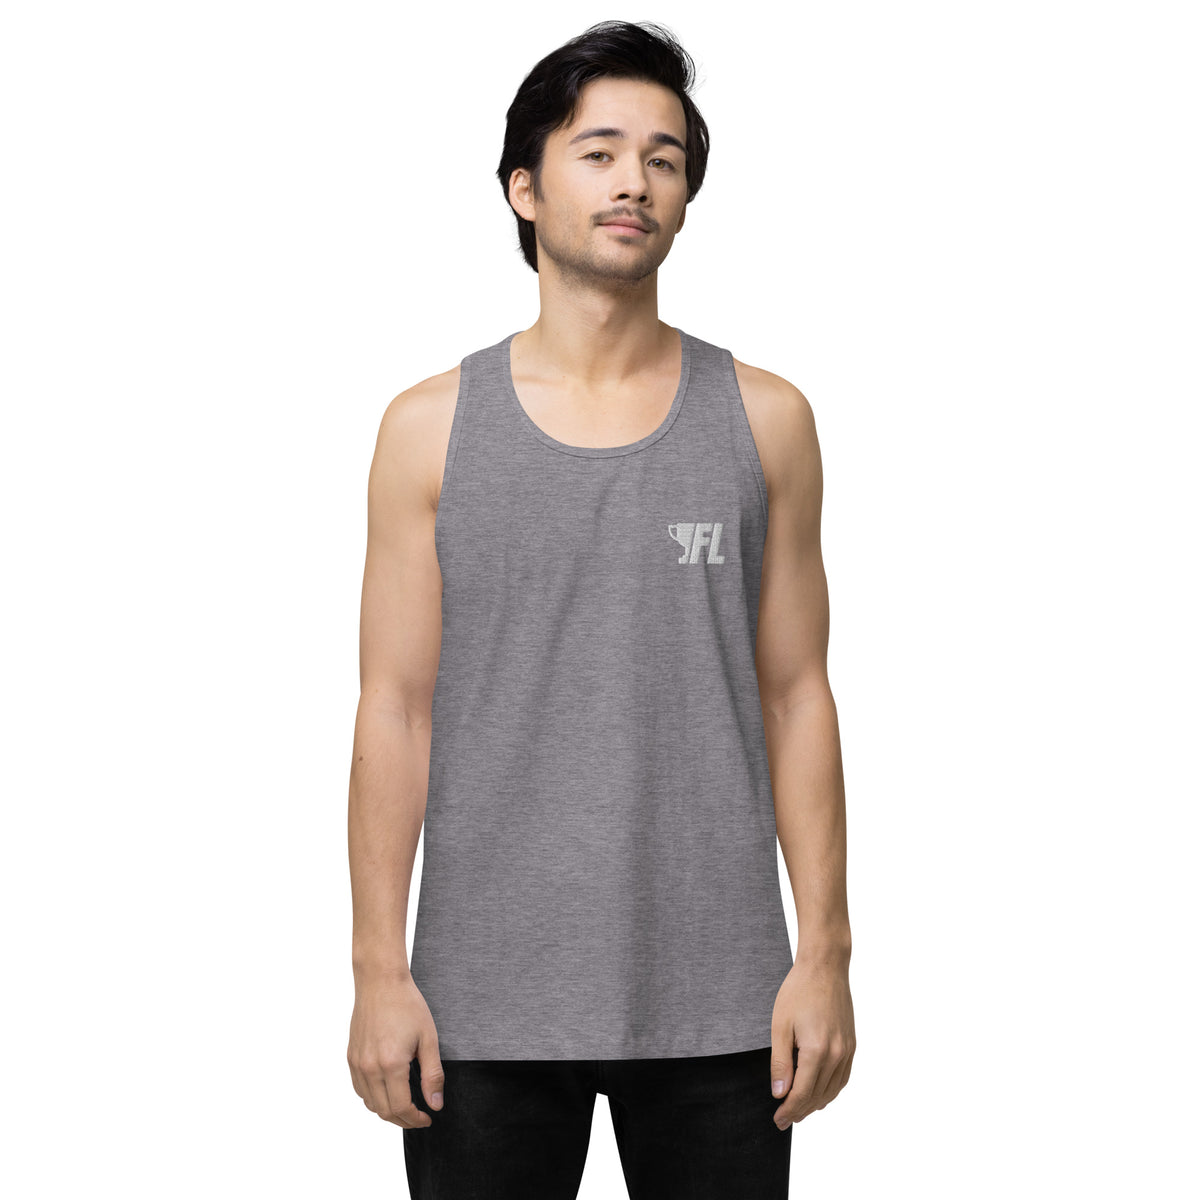 FL2024 Embroidered Tank